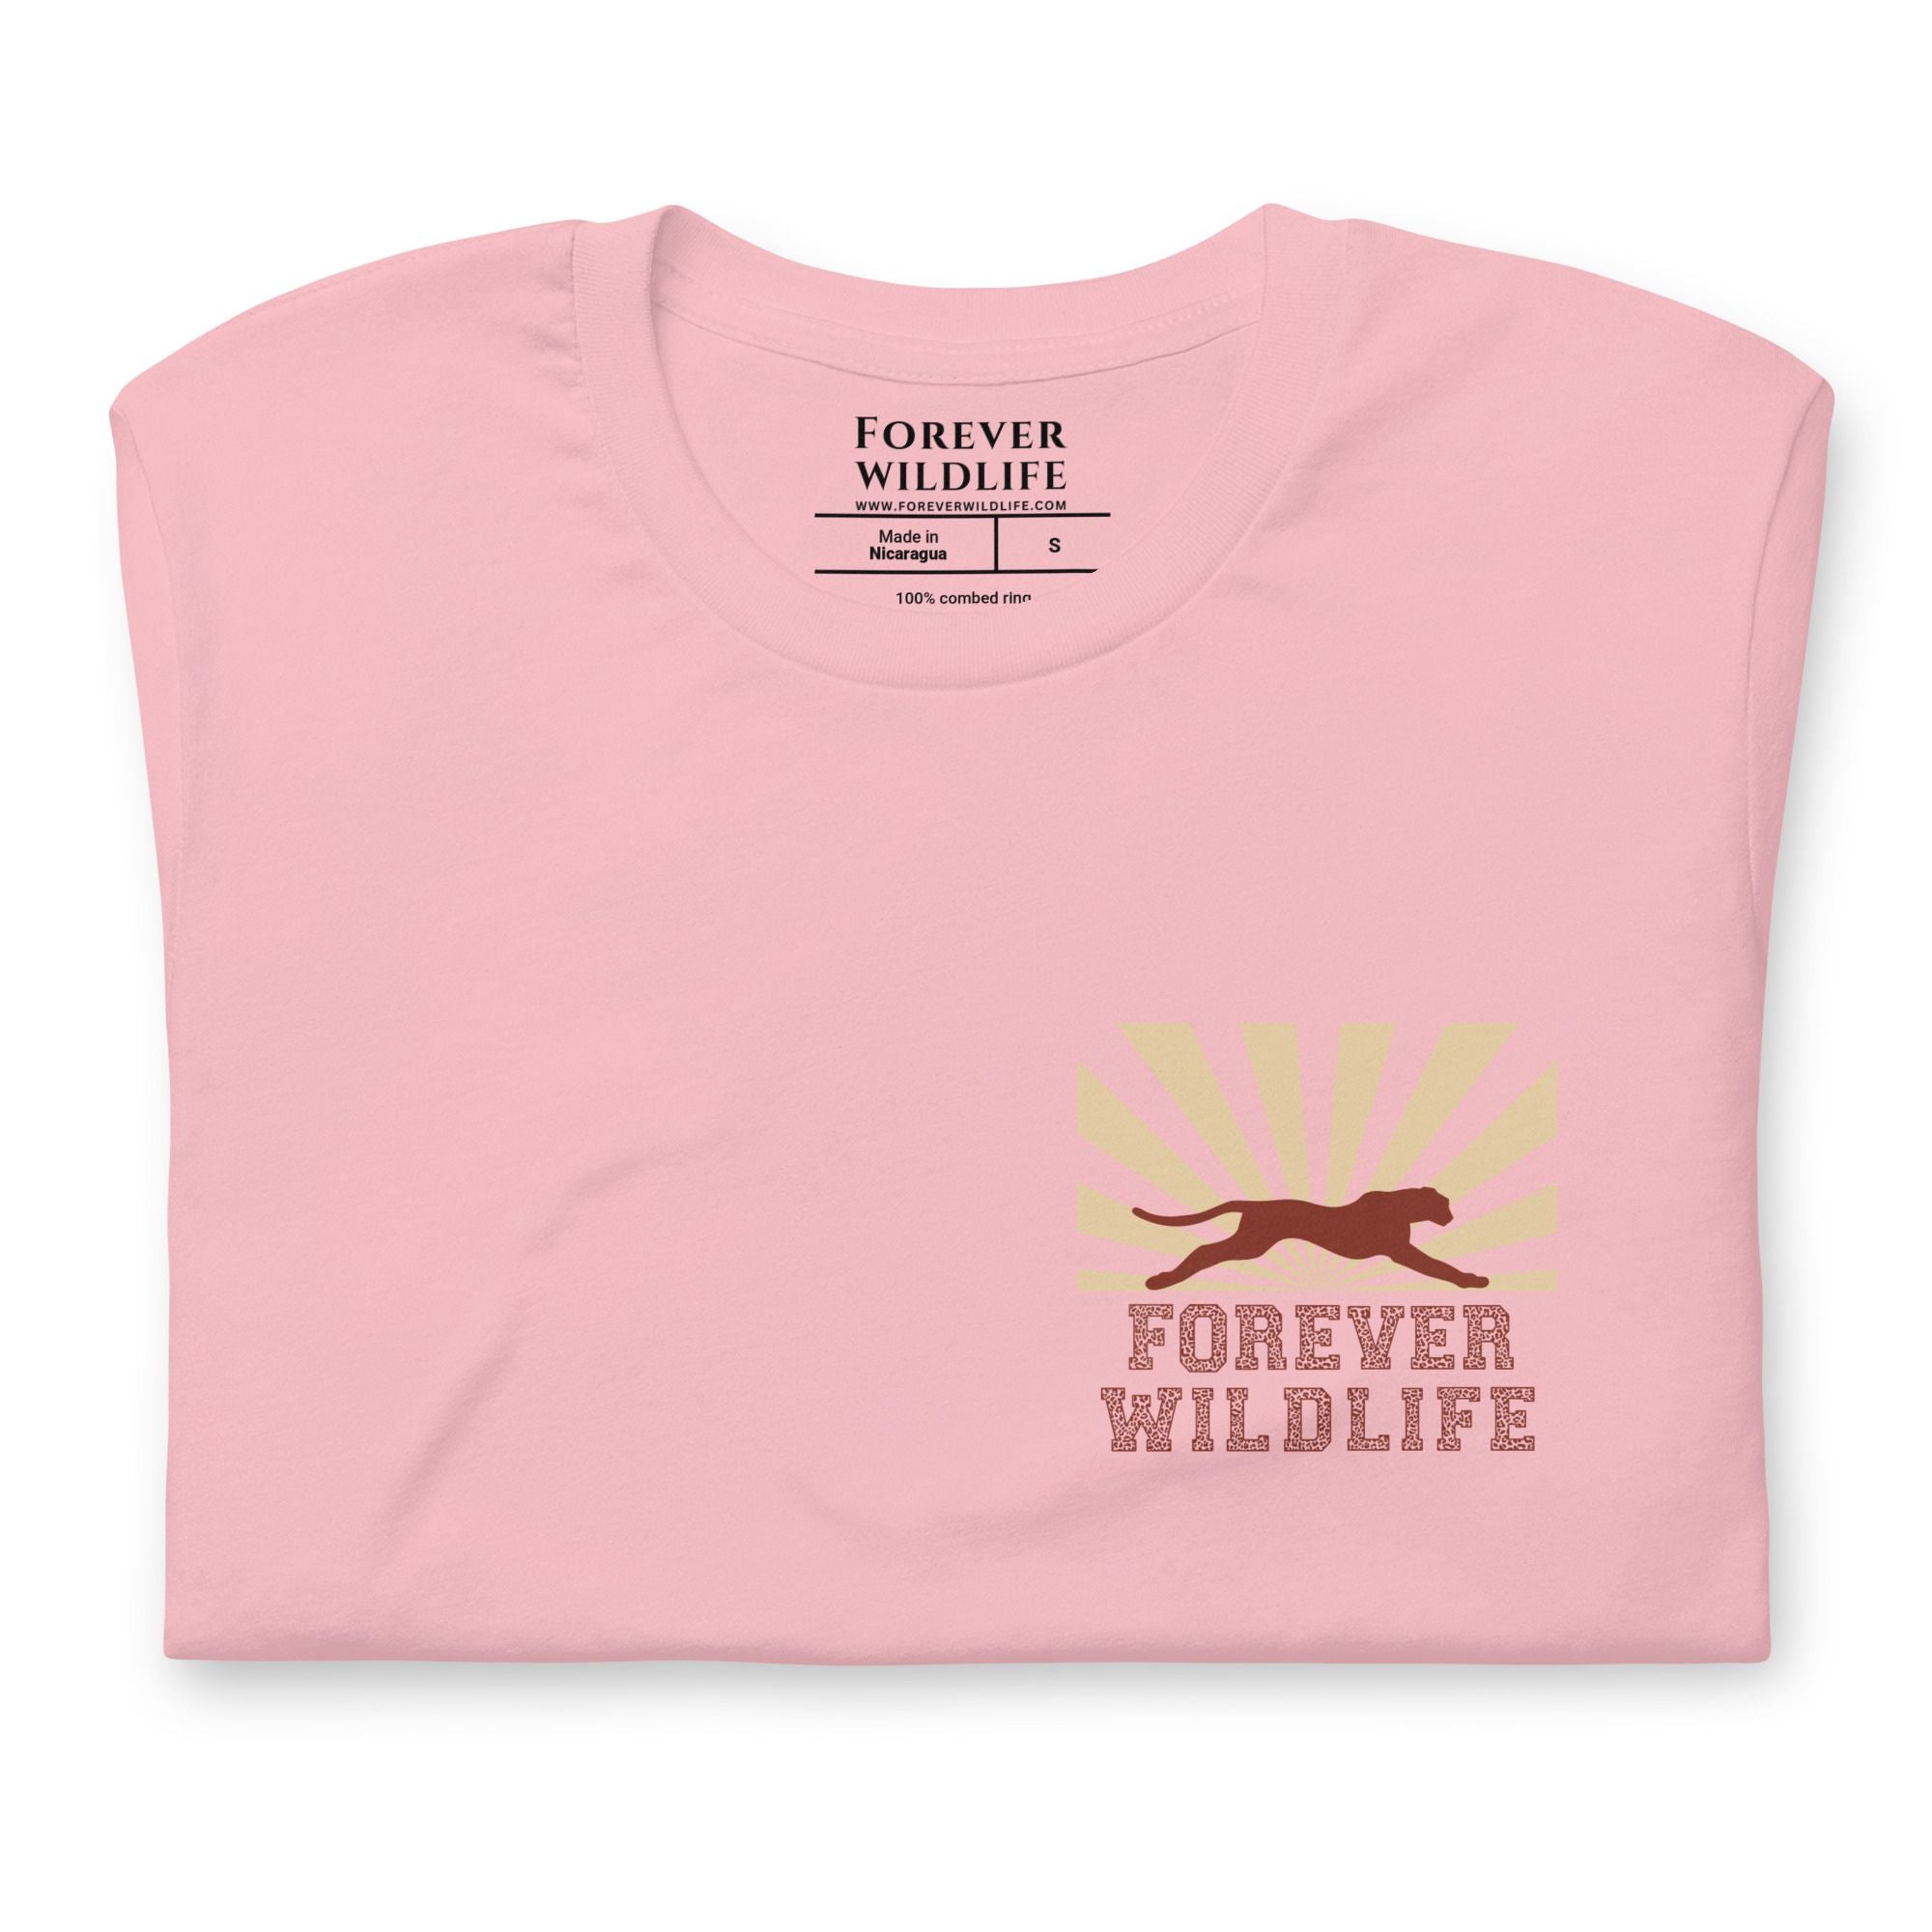 Cheetah Shirt, gorgeous pink Cheetah T-Shirt with a cheetah graphic made by Forever Wildlife selling Wildlife T-Shirts.